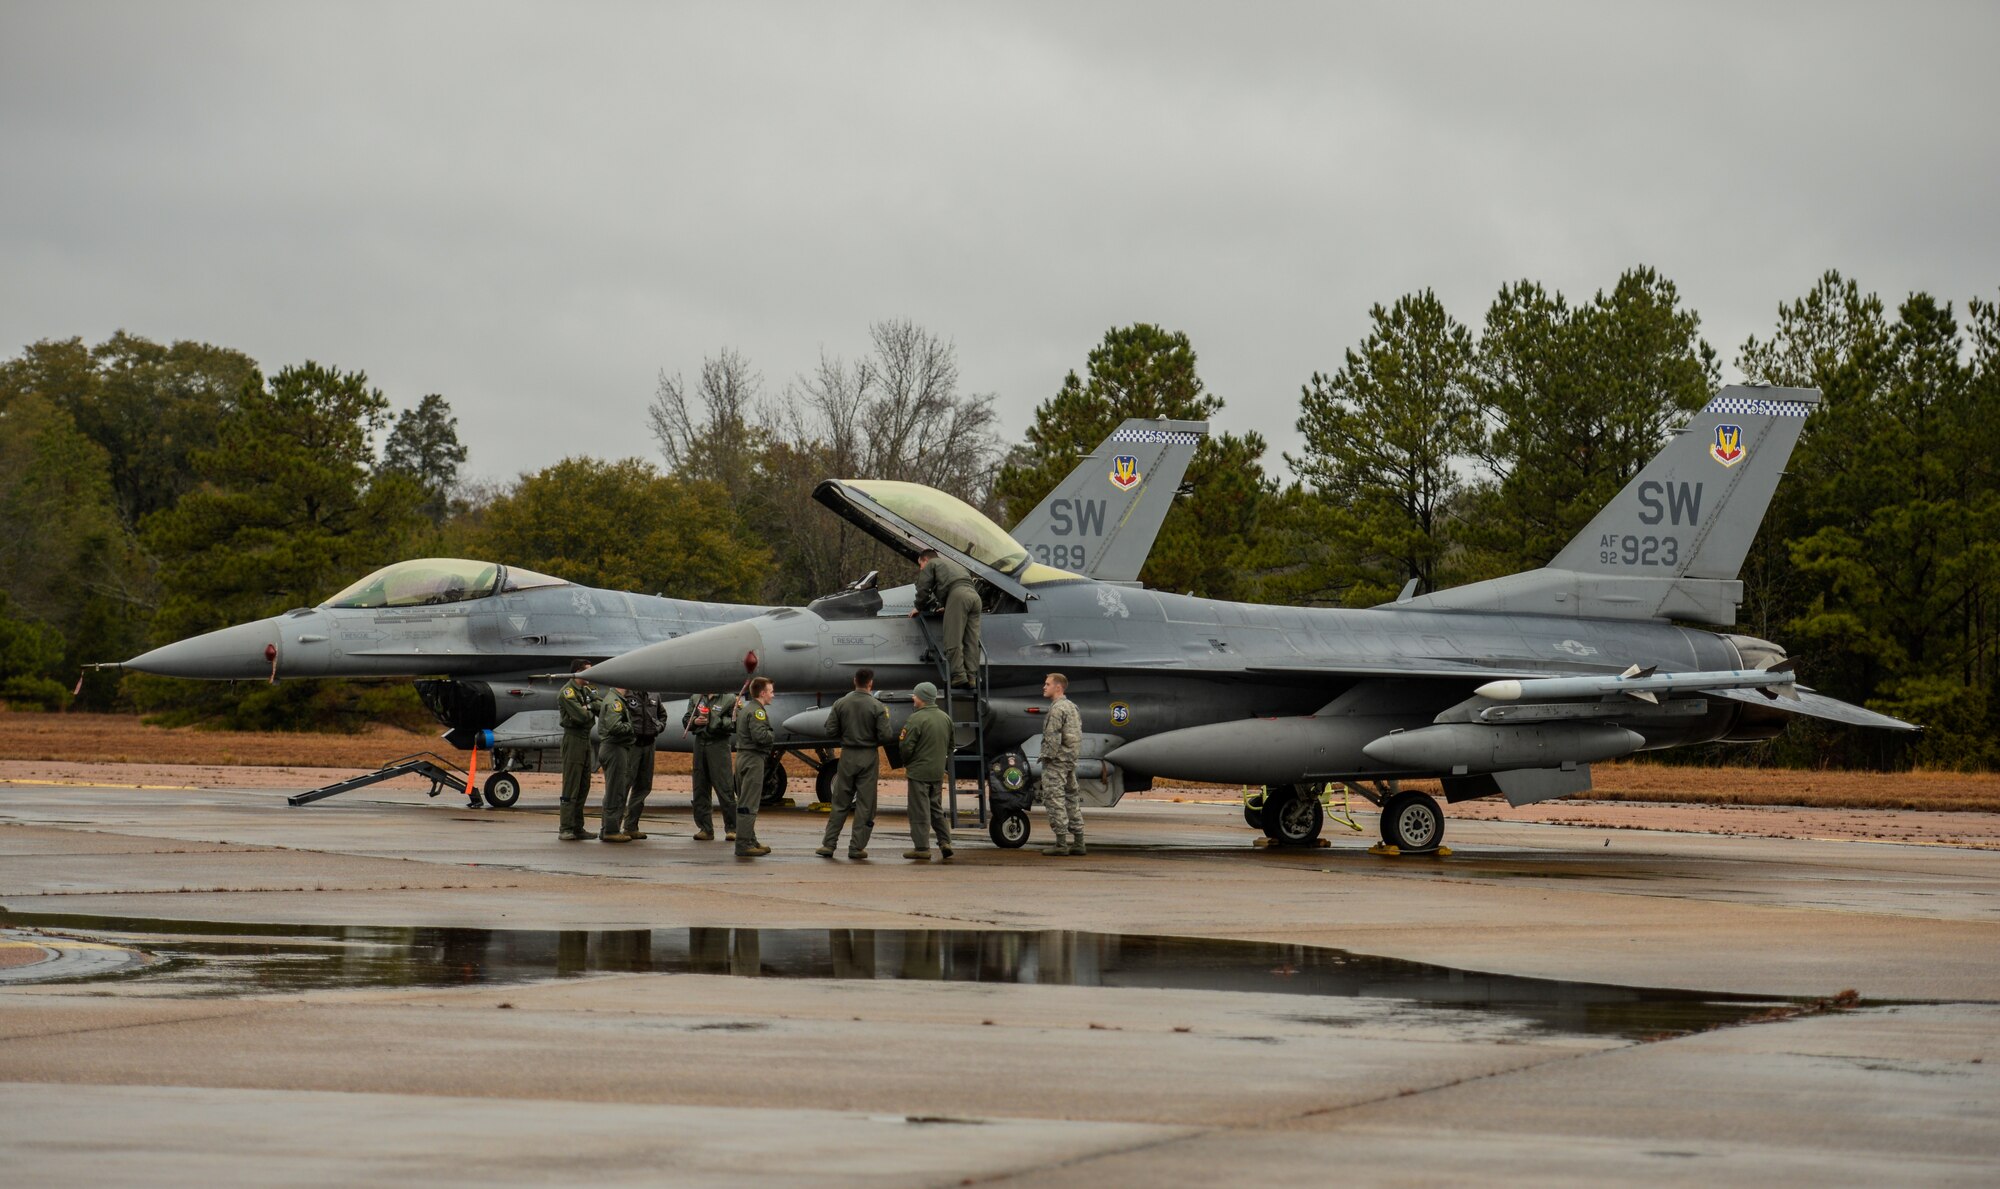 Airmen line up to view the interior of an F-16 Fighting Falcon Dec. 10, 2019, at Columbus Air Force Base, Miss. Since Sept. 11, 2001, the F-16 has been a major component of the combat forces committed to the war on terrorism flying thousands of sorties in support of operations Noble Eagle (Homeland Defense), Enduring Freedom in Afghanistan and Iraqi Freedom. (U.S. Air Force photo by Airman Davis Donaldson)